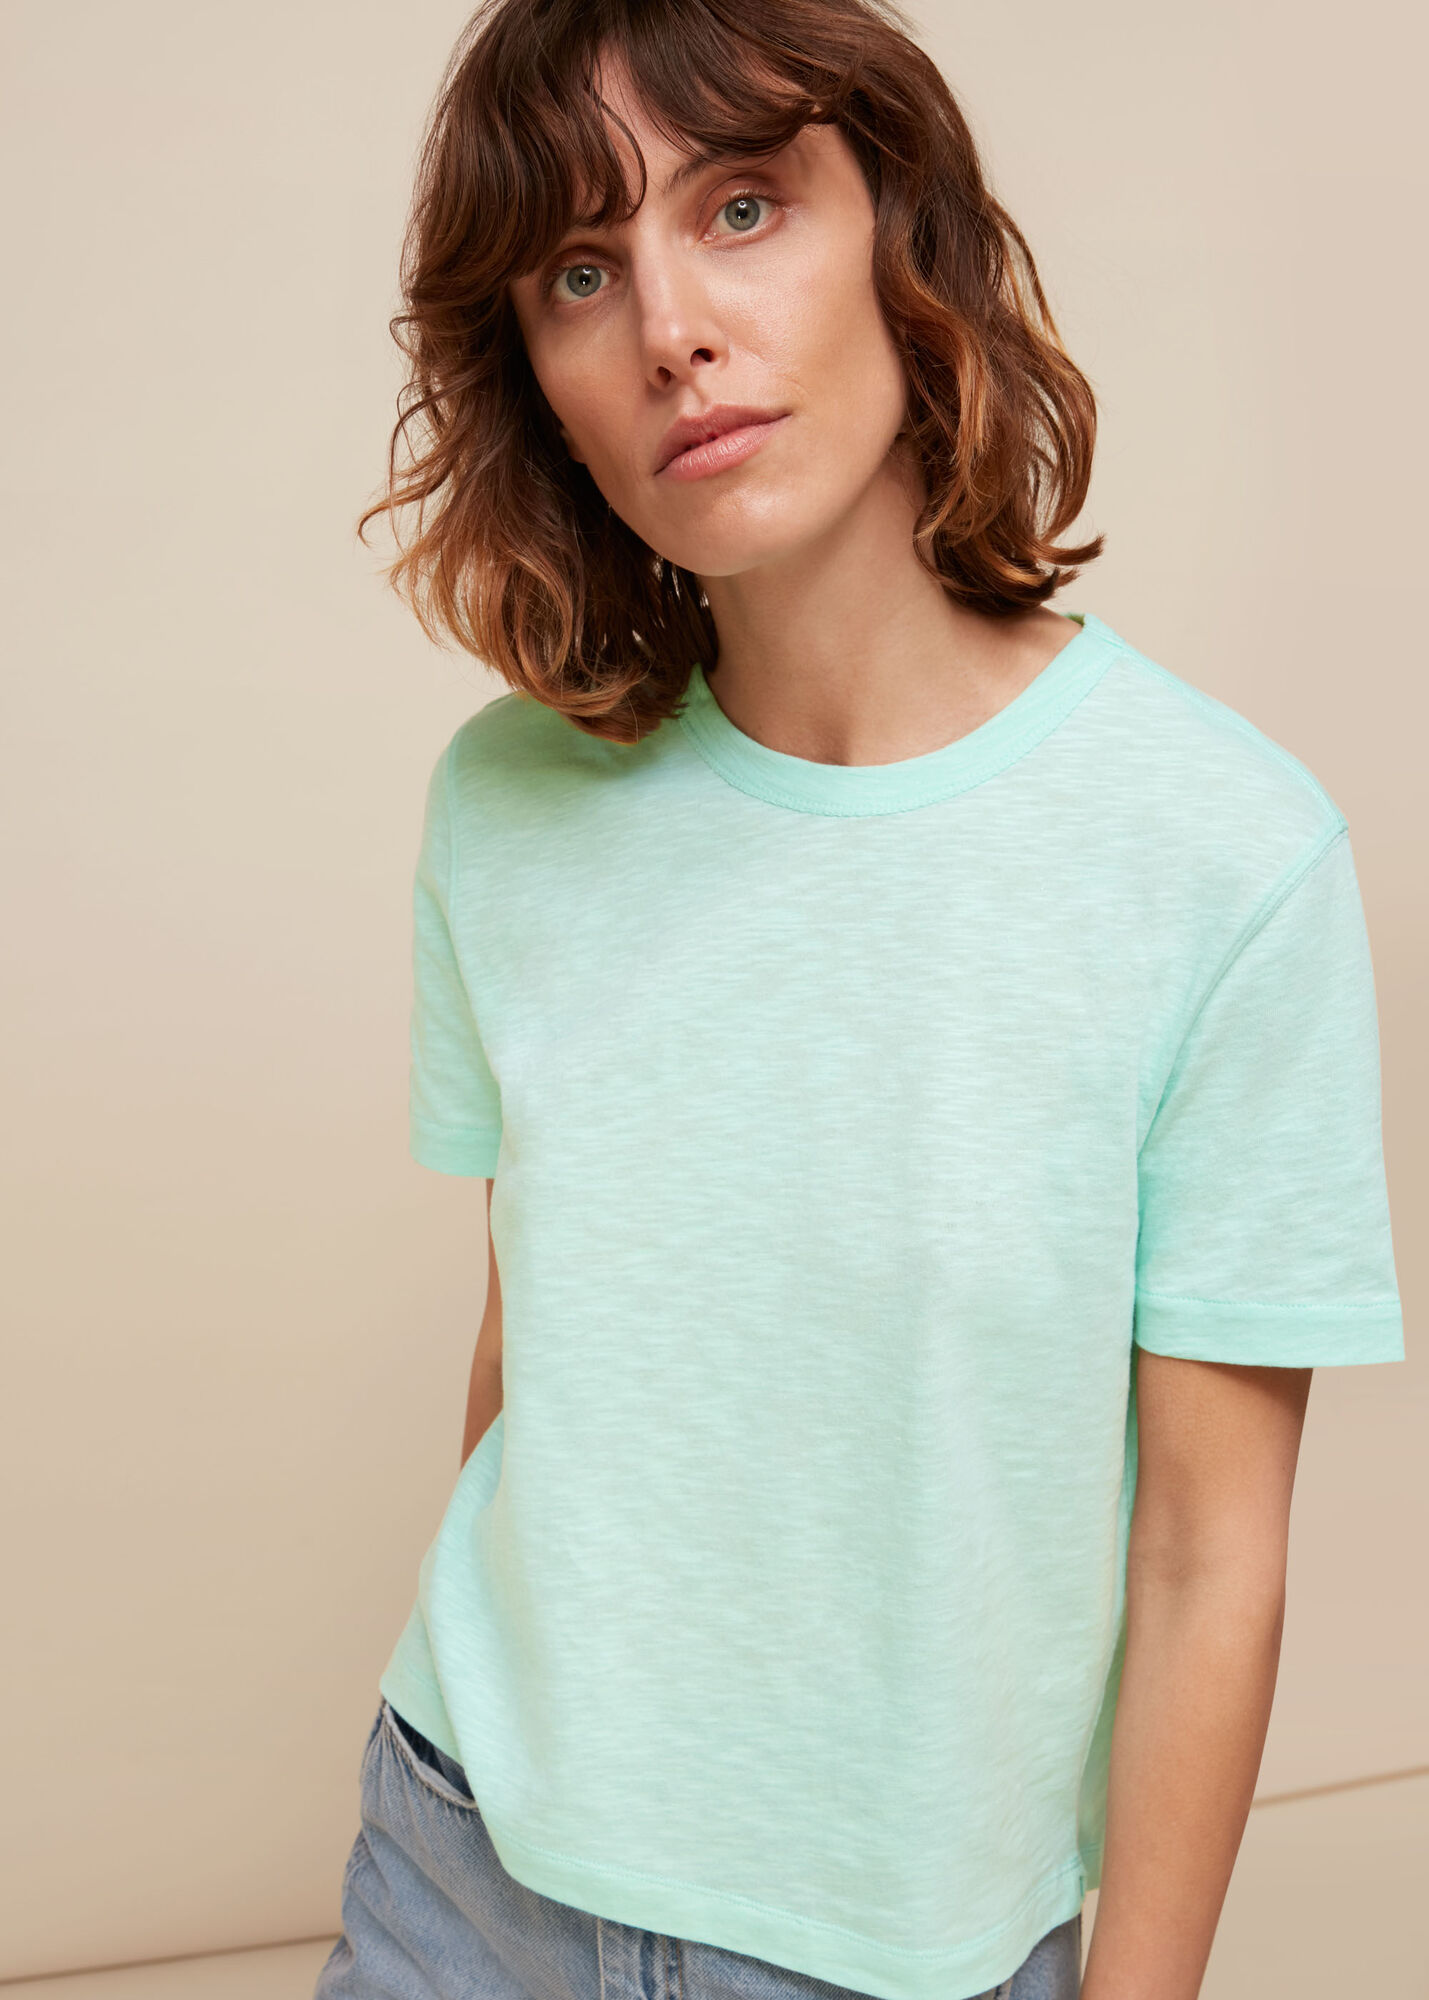 Mint Emily Ultimate Tshirt | WHISTLES